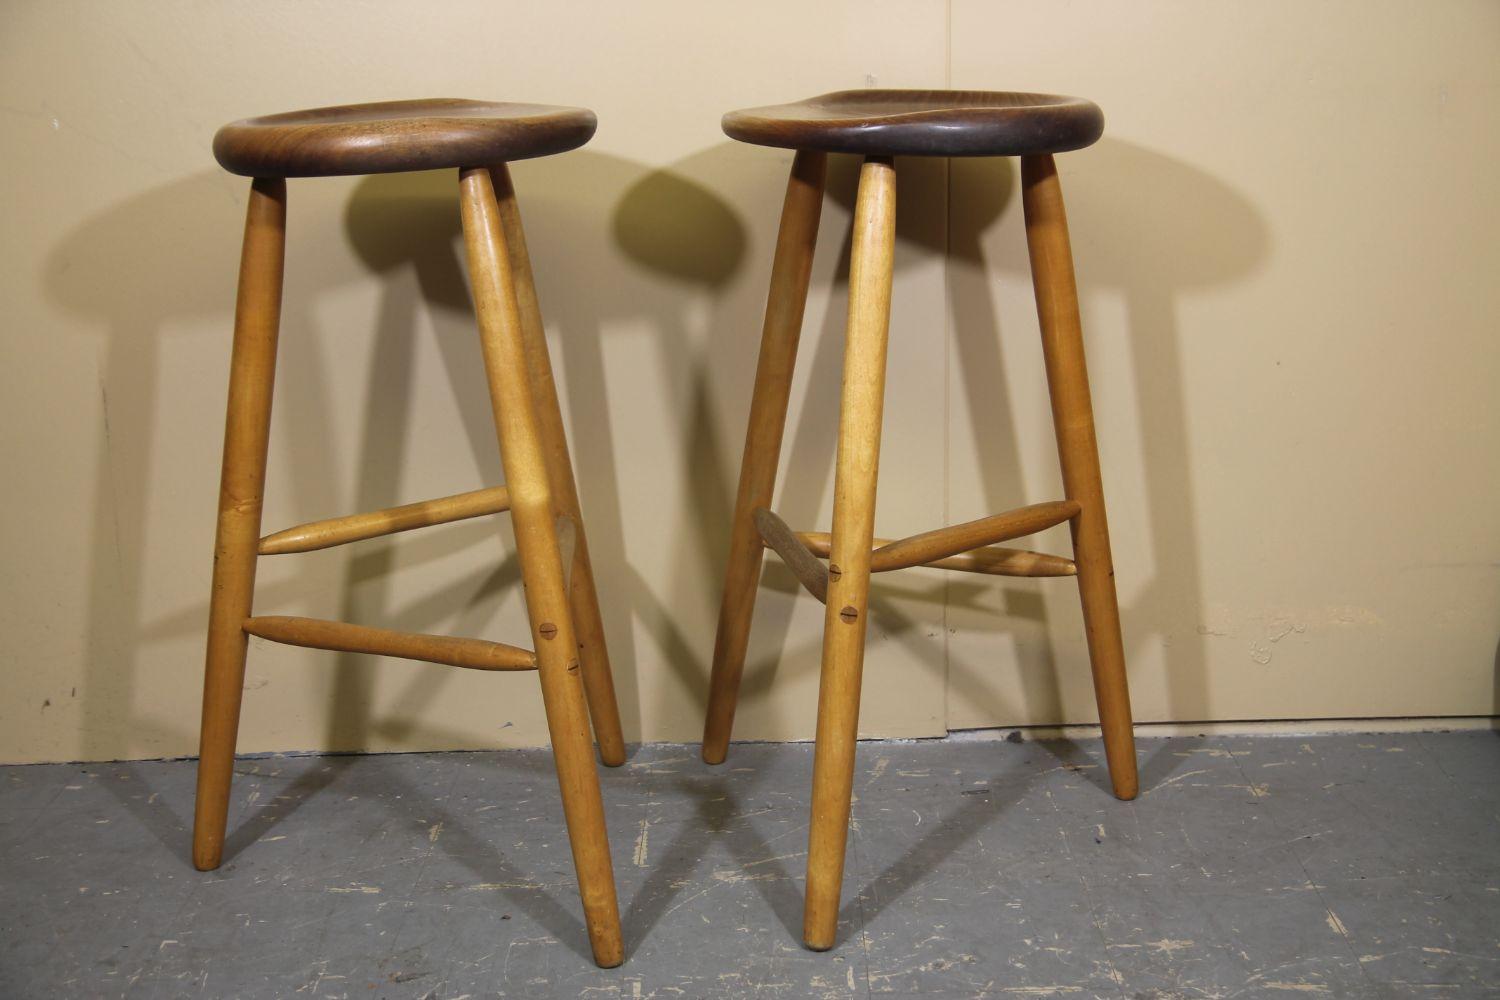 Great pair of stools by the Kia Pedersen of Lancaster Pa. Stools have the staggered stretchers that is a signature style of Pedersen.